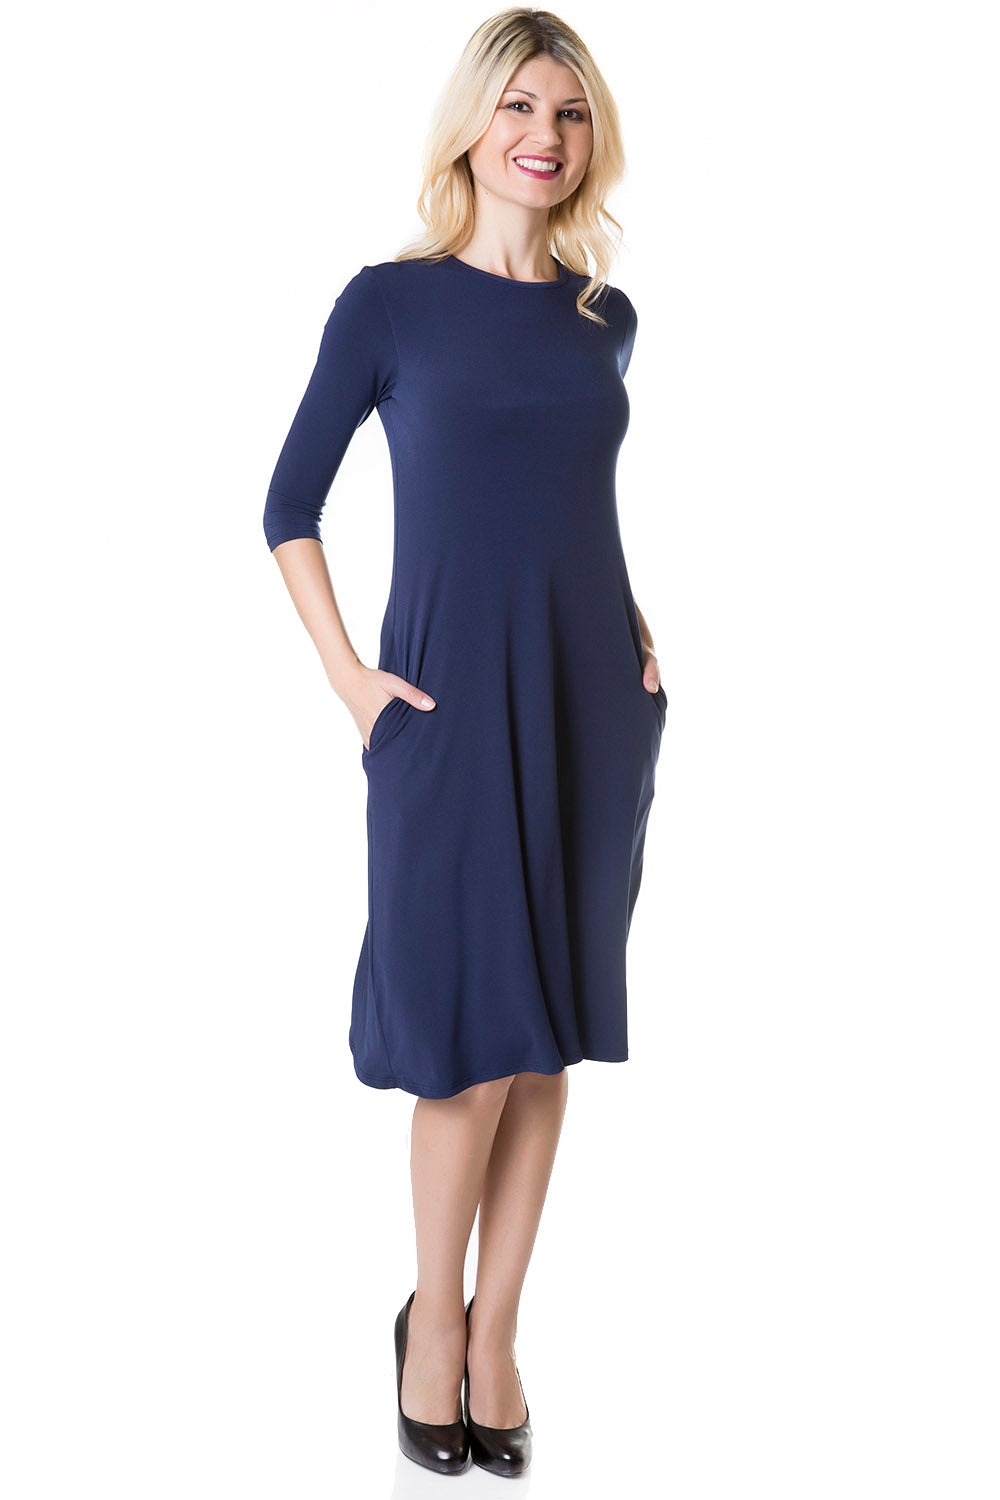 Esteez TAMMEE Dress - Womens Classic Fit and Flare Dress with pockets - NAVY